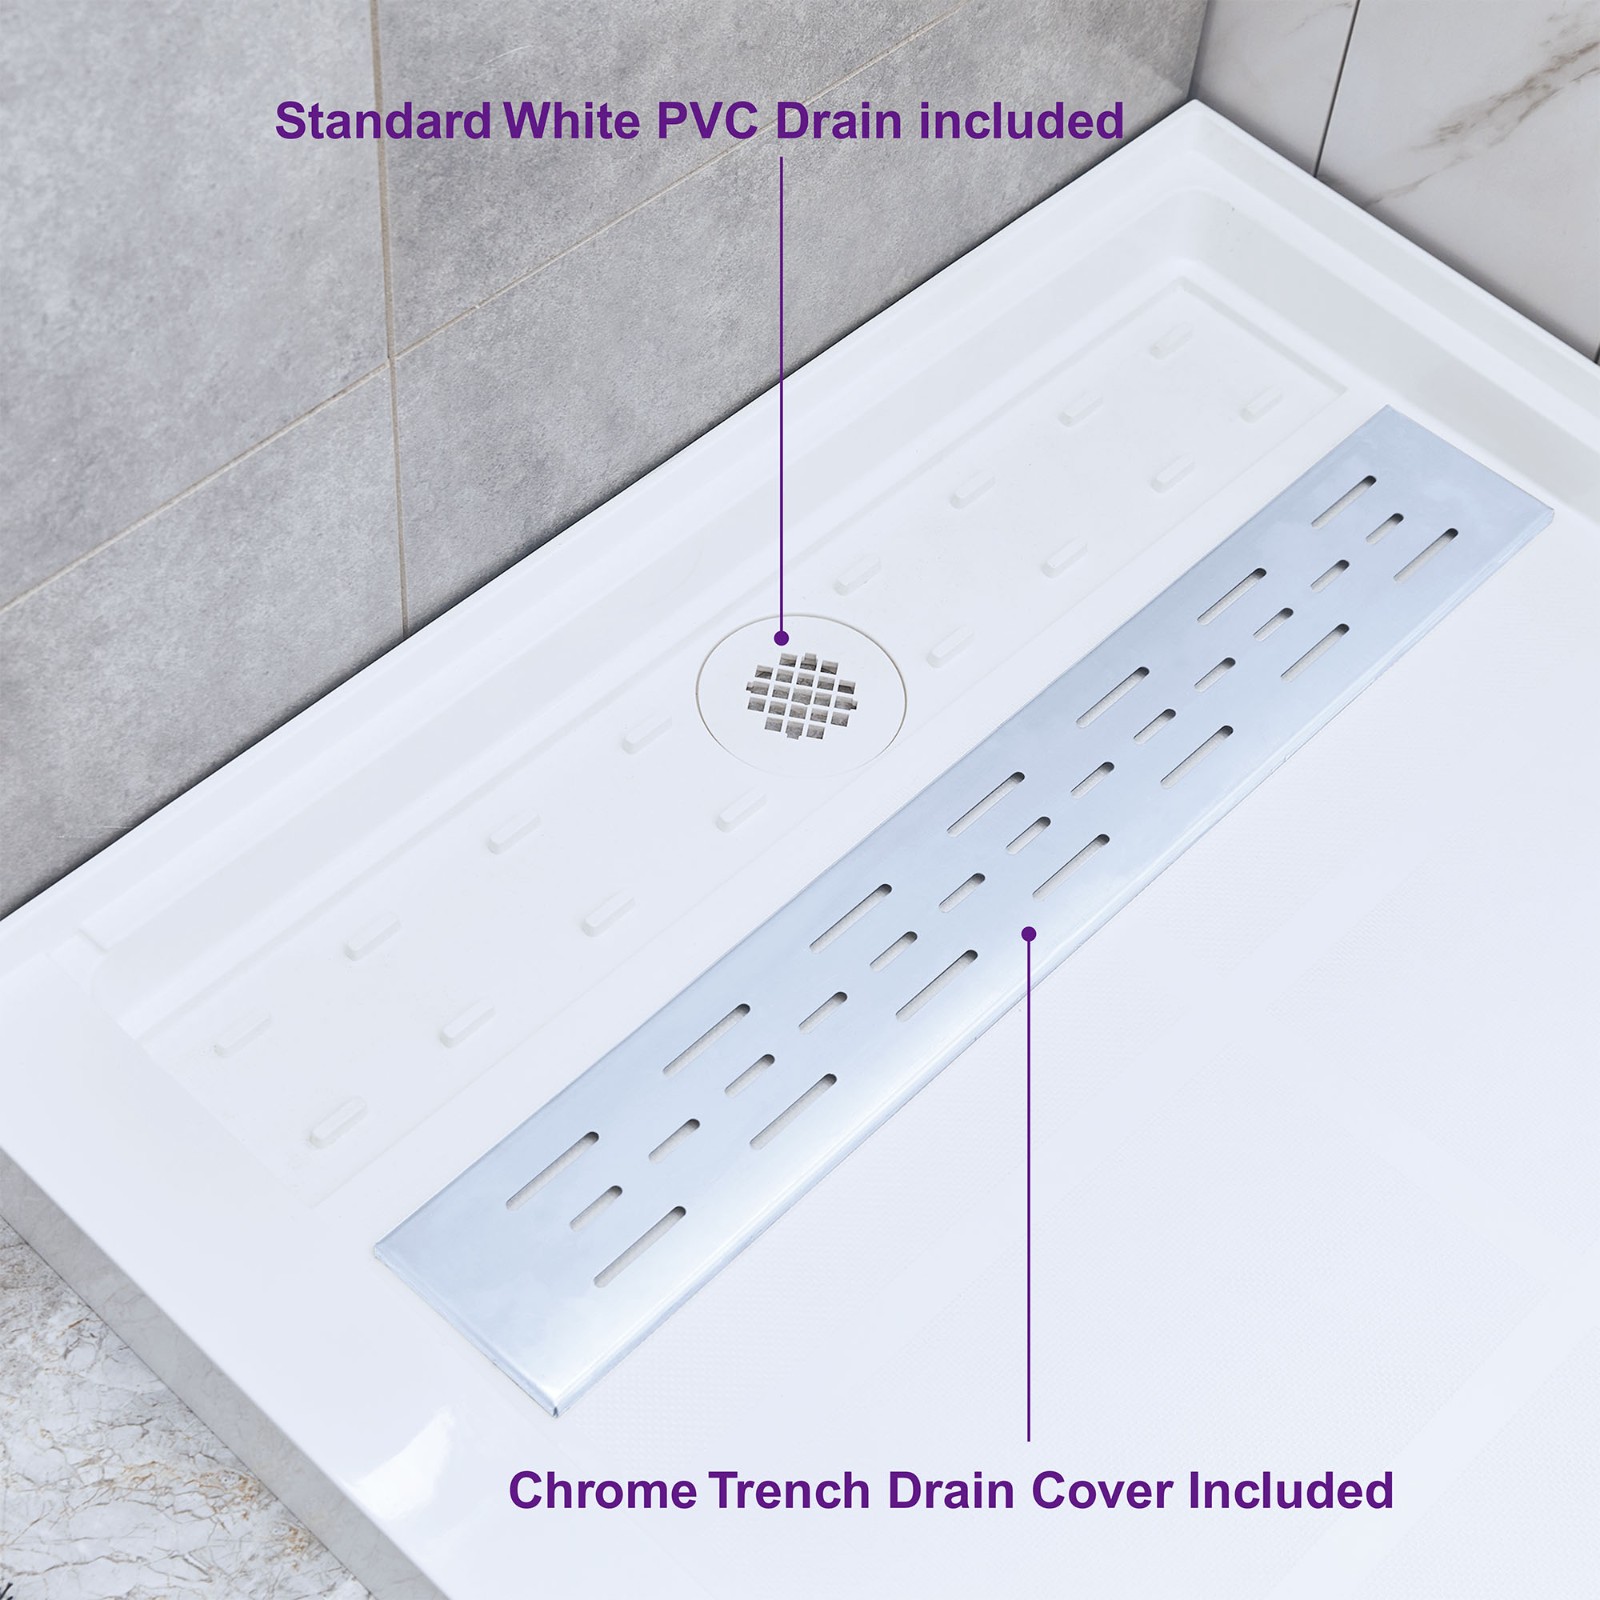  WOODBRIDGE SBR6032-1000R-CH SolidSurface Shower Base with Recessed Trench Side Including  Chrome Linear Cover, 60